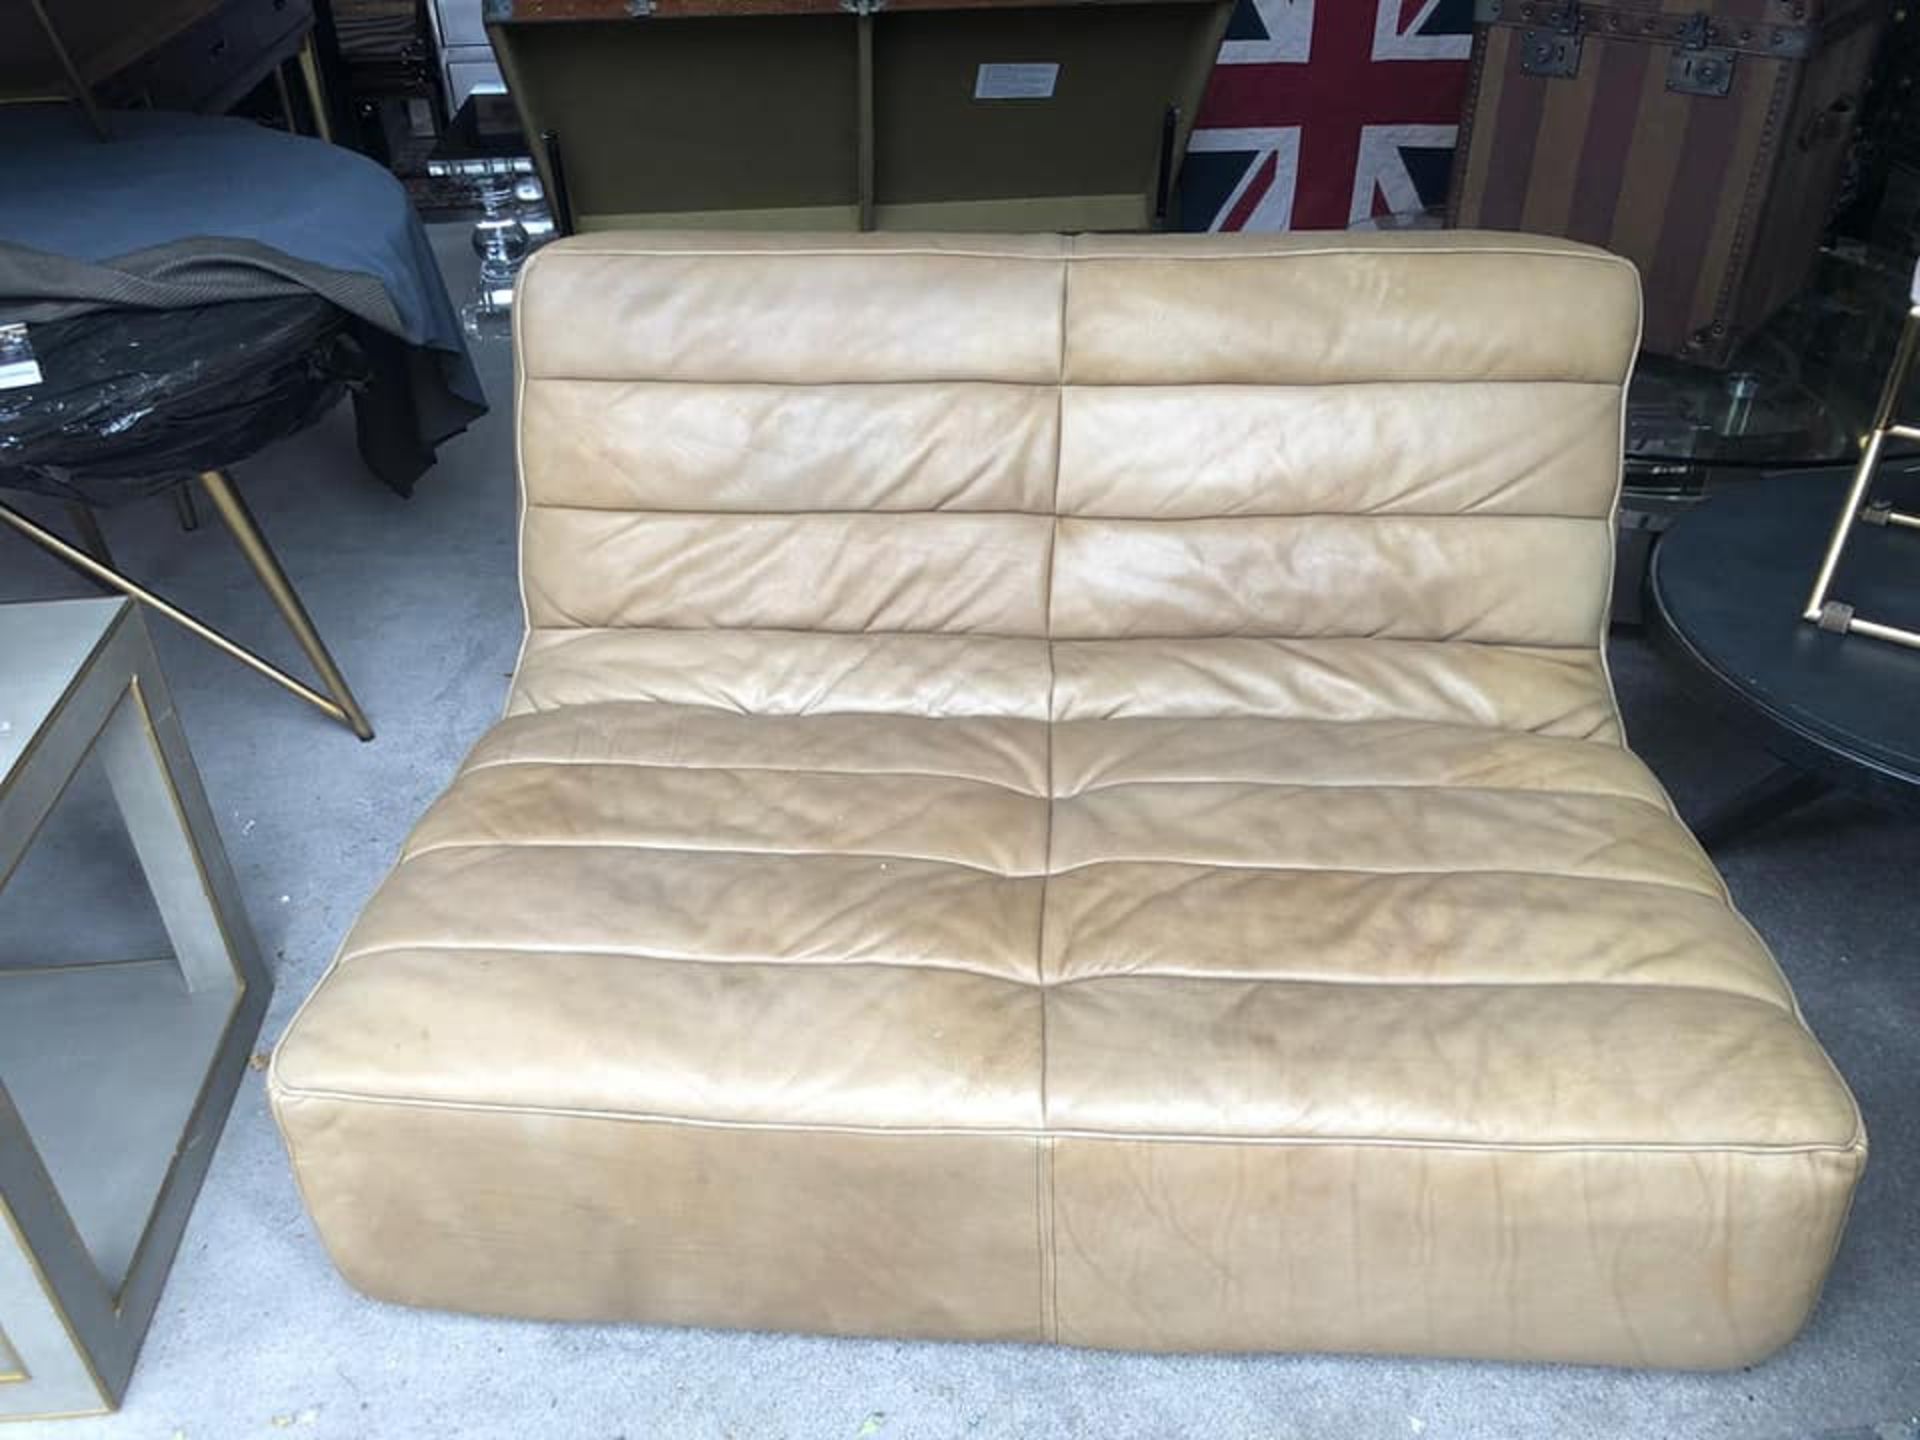 Shabby 2 Seater Sofa Full Rebel Leather High impact comfort seating, commonly known as our true ‘ - Image 2 of 2